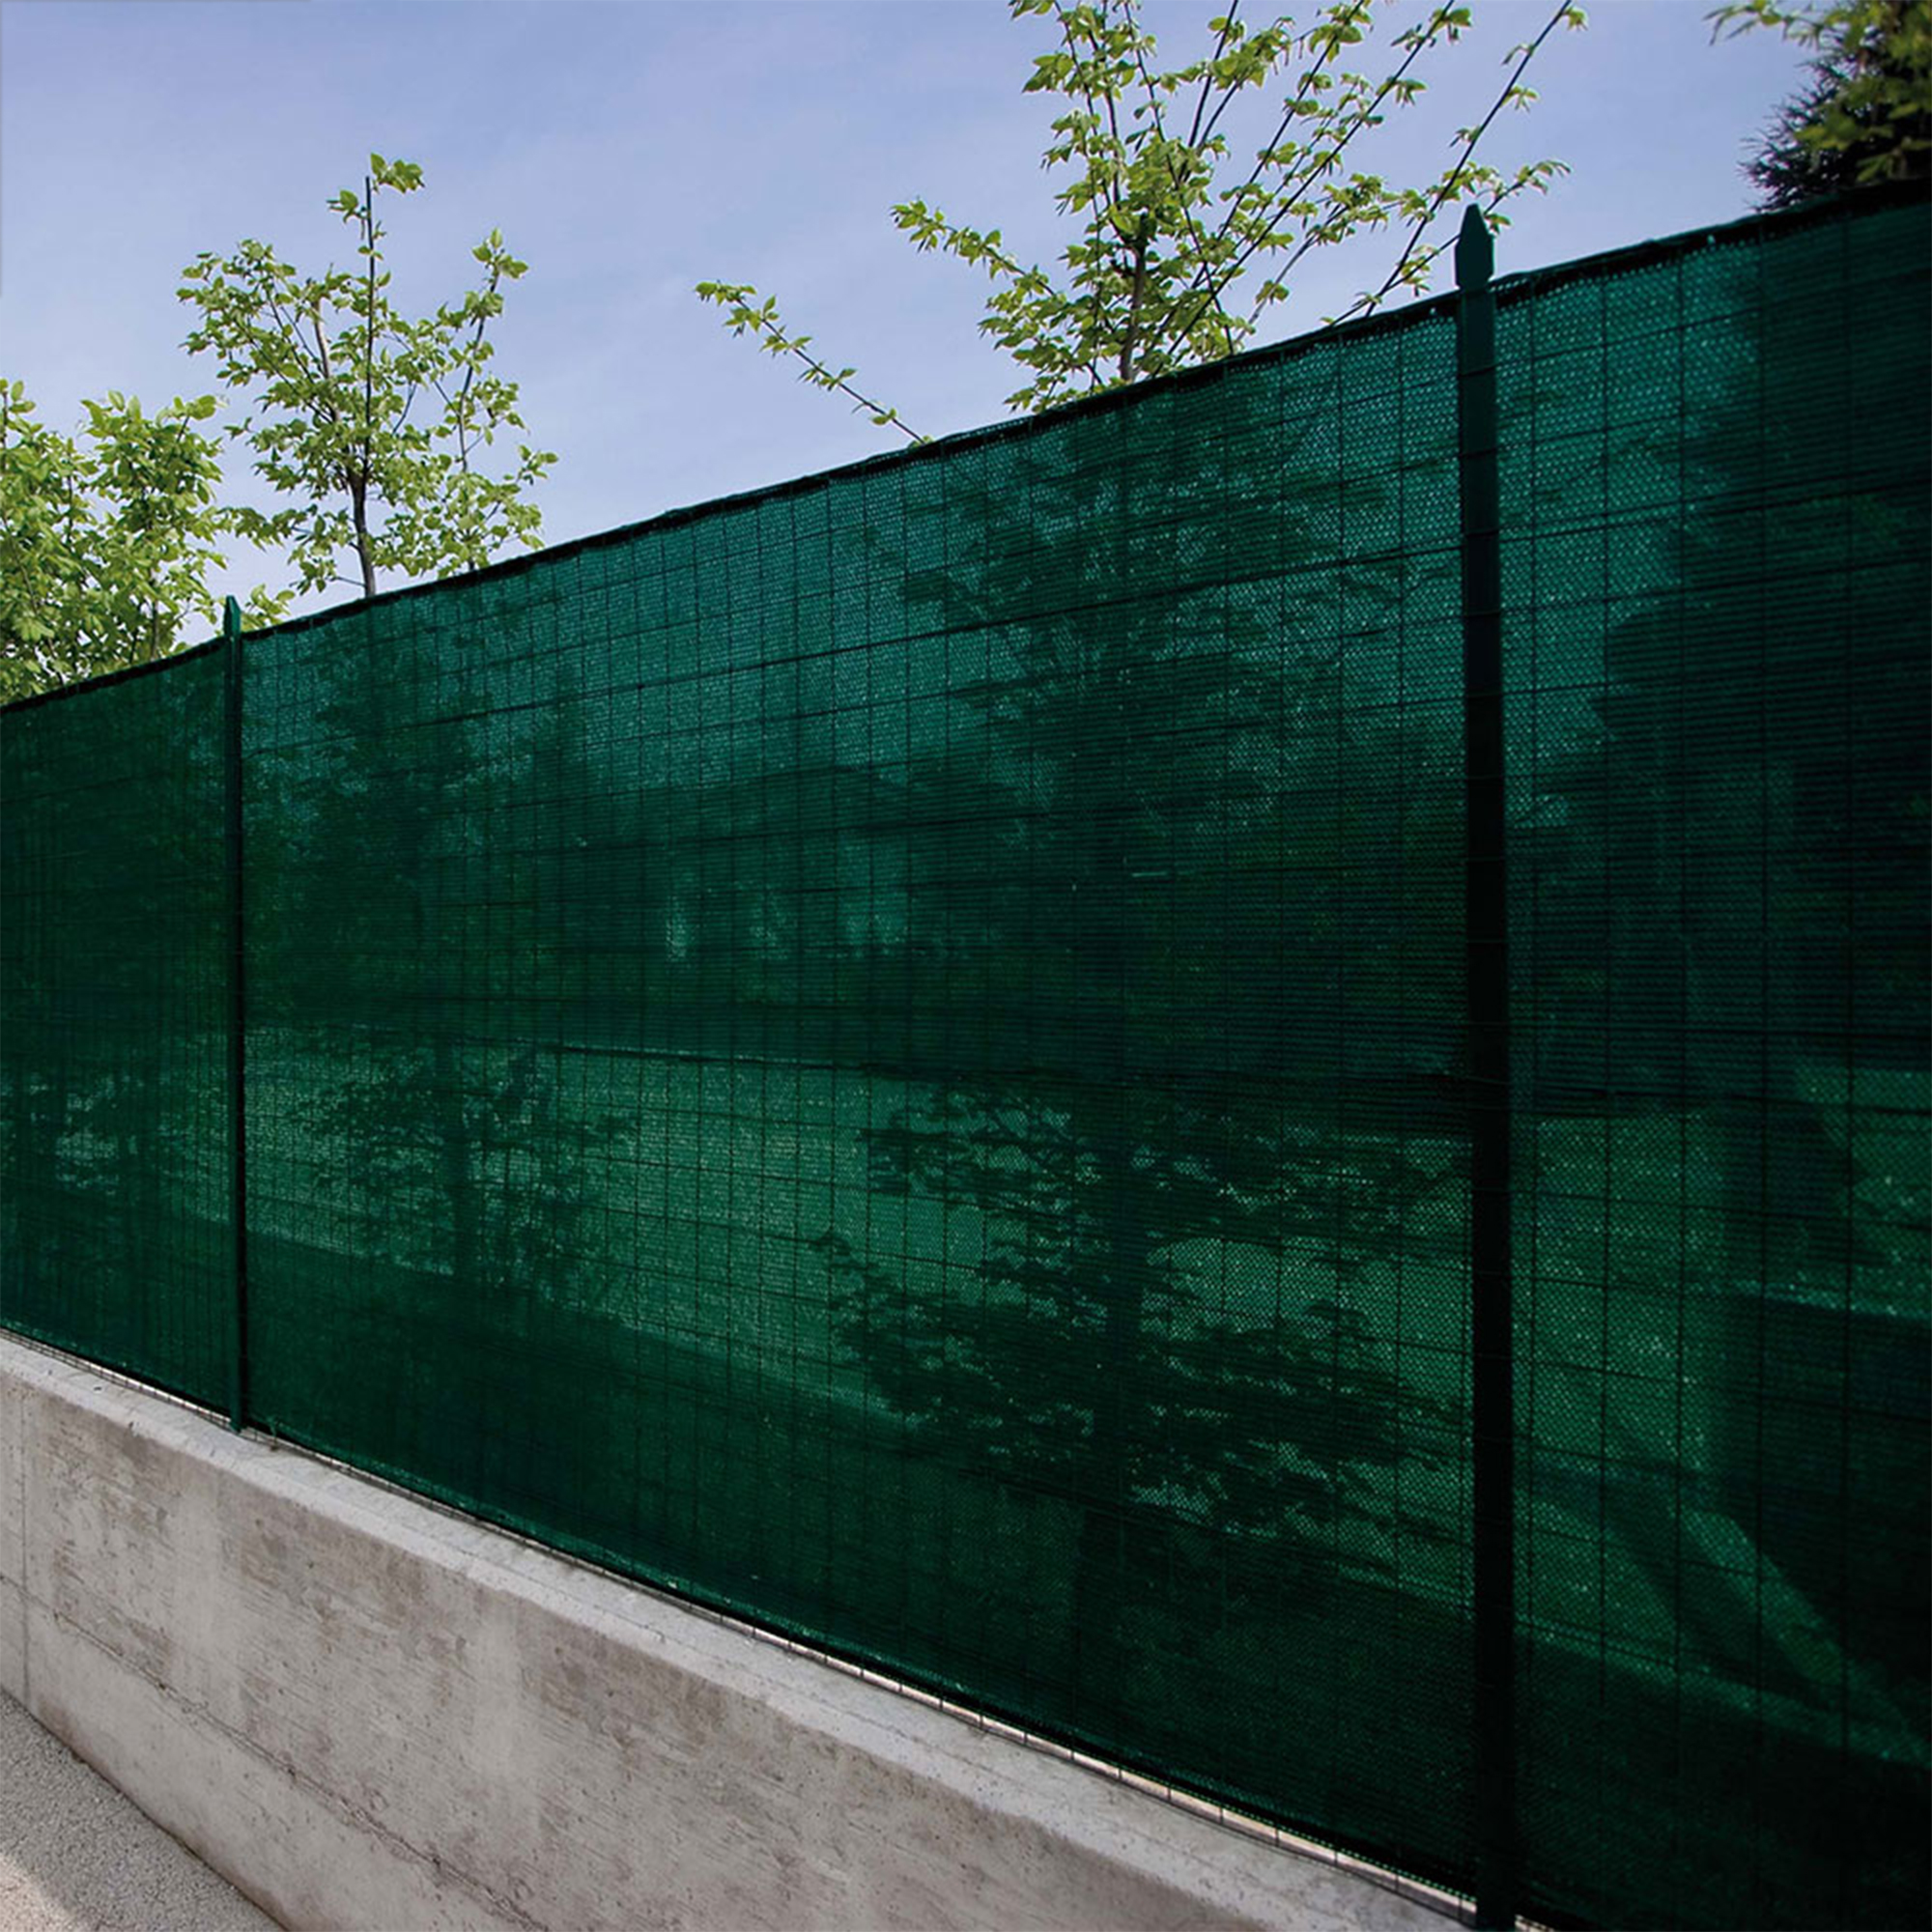 Tenax HDPE Lightweight Tear Resistant Privacy Screen, 7.8x150ft, Green - image 3 of 3